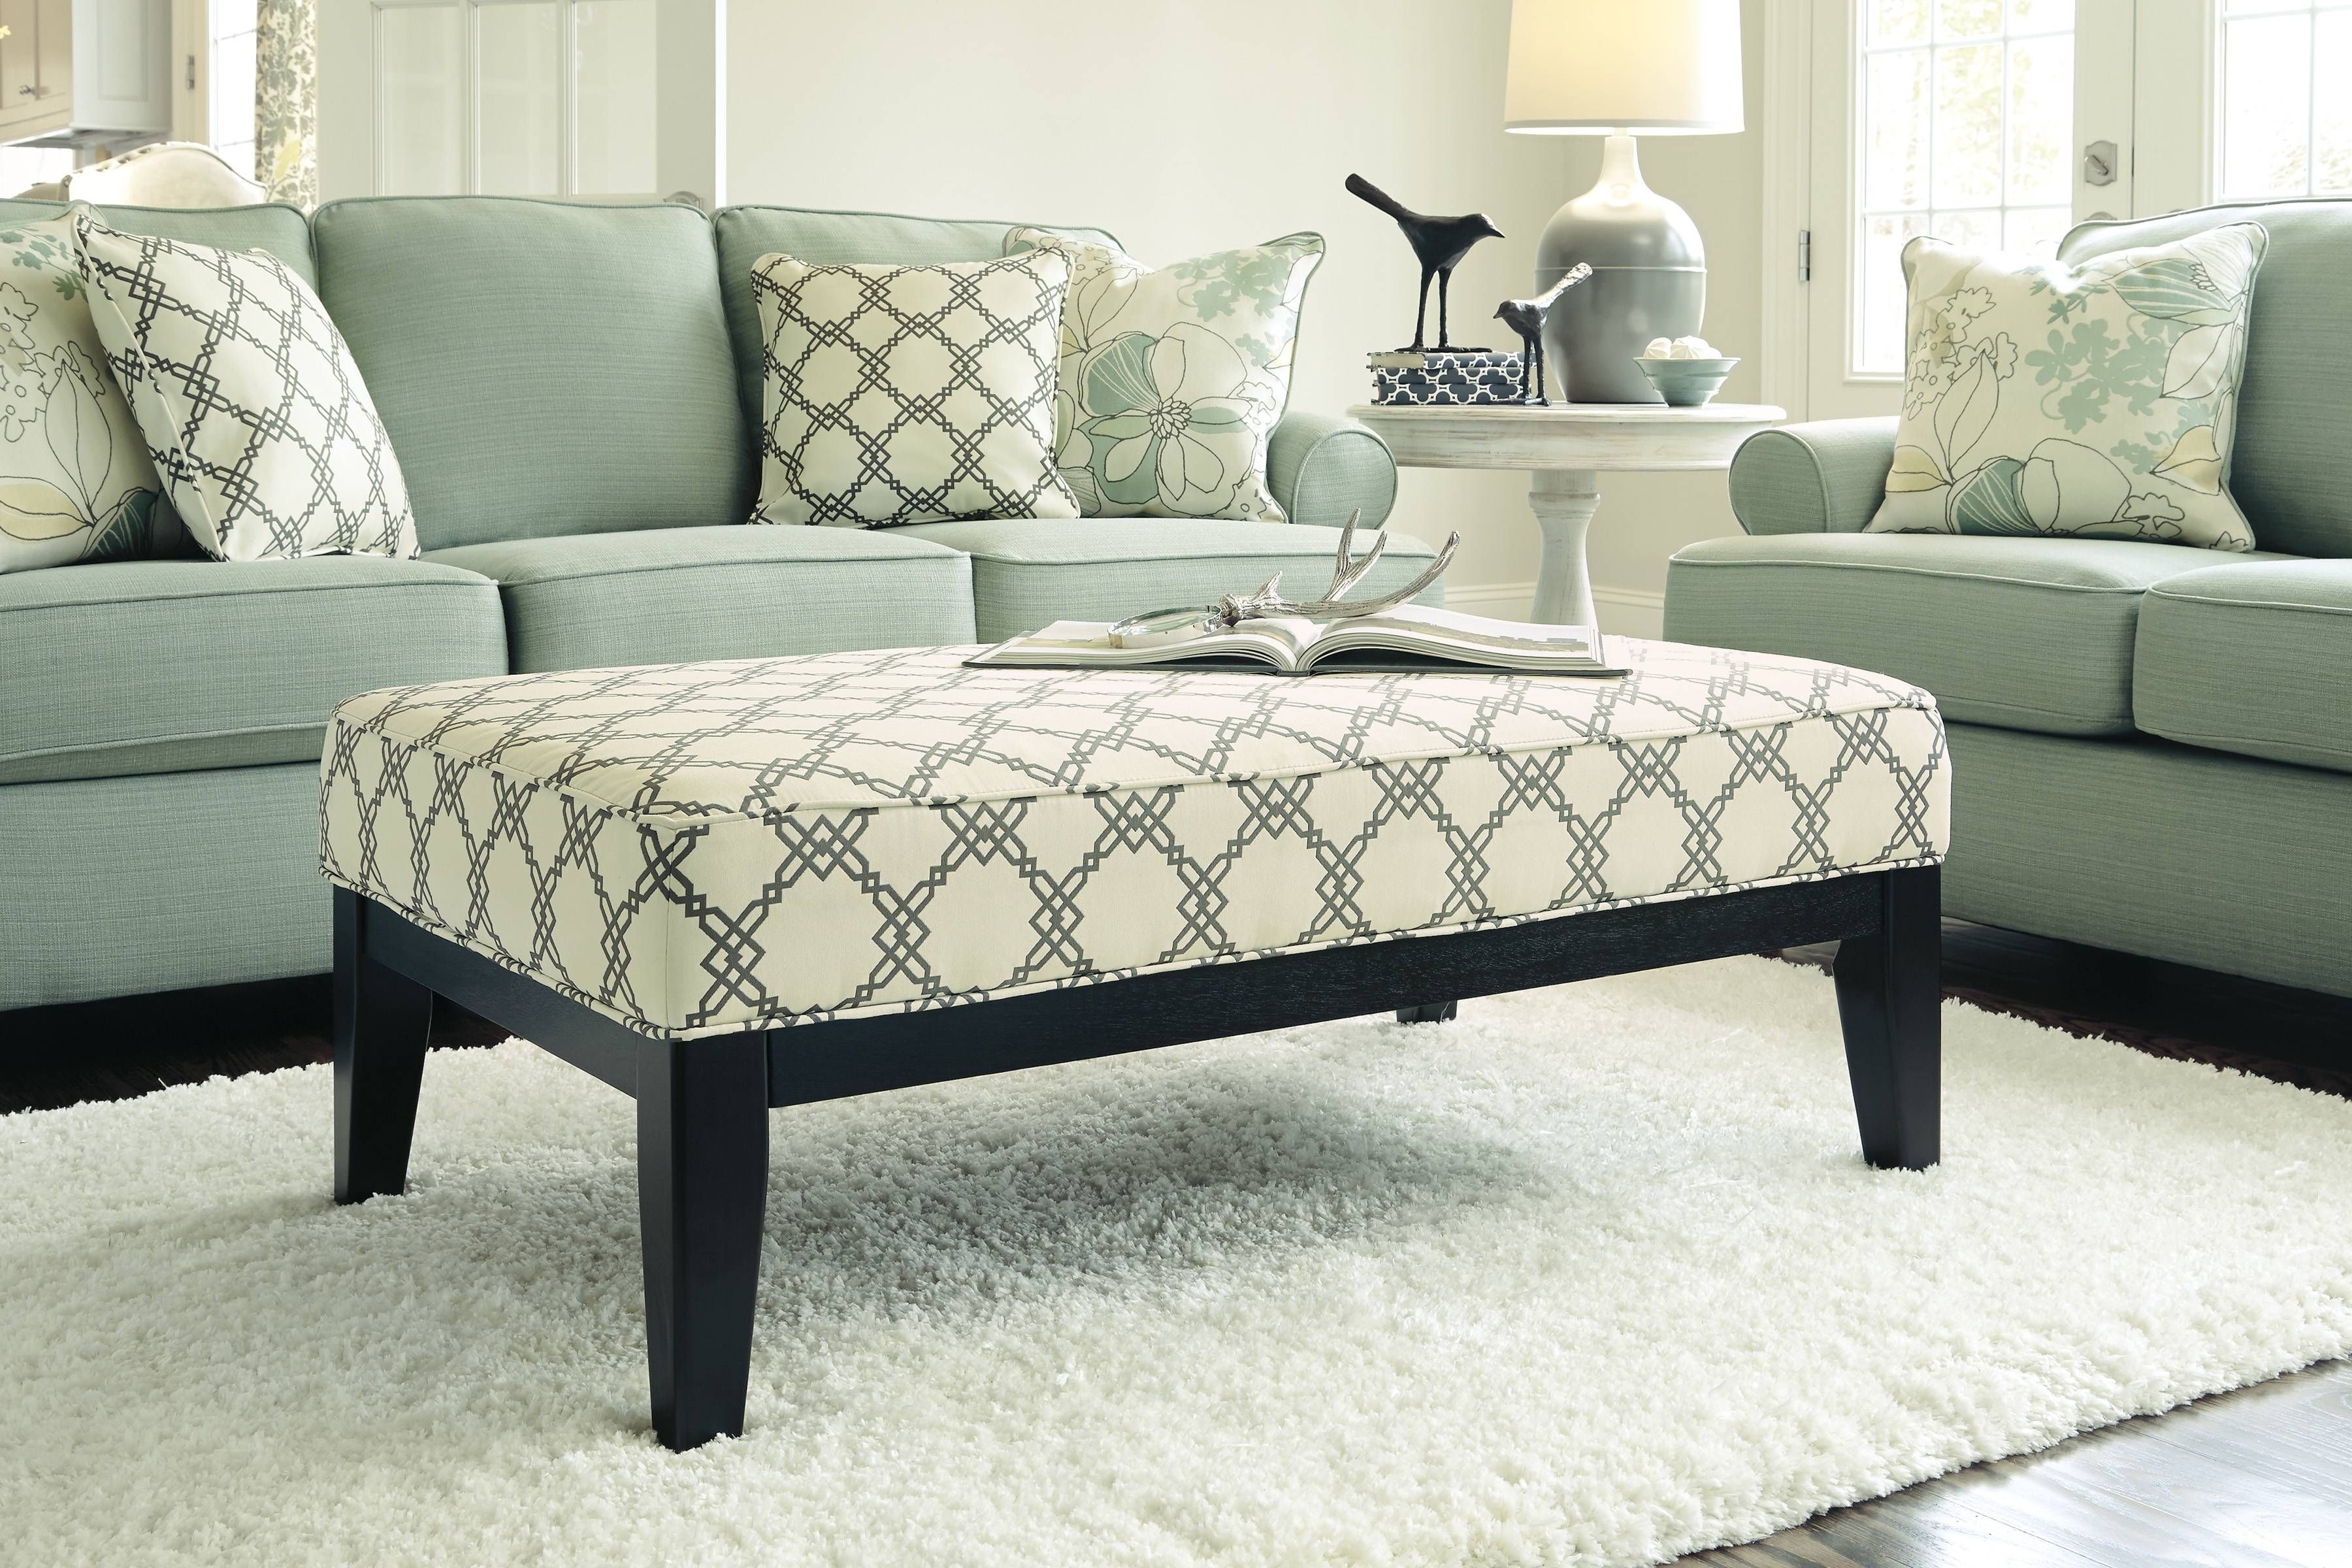 Furniture: Oversized Ottoman Coffee Table For Stylish Living Room Inside Footstool Coffee Tables (View 3 of 30)